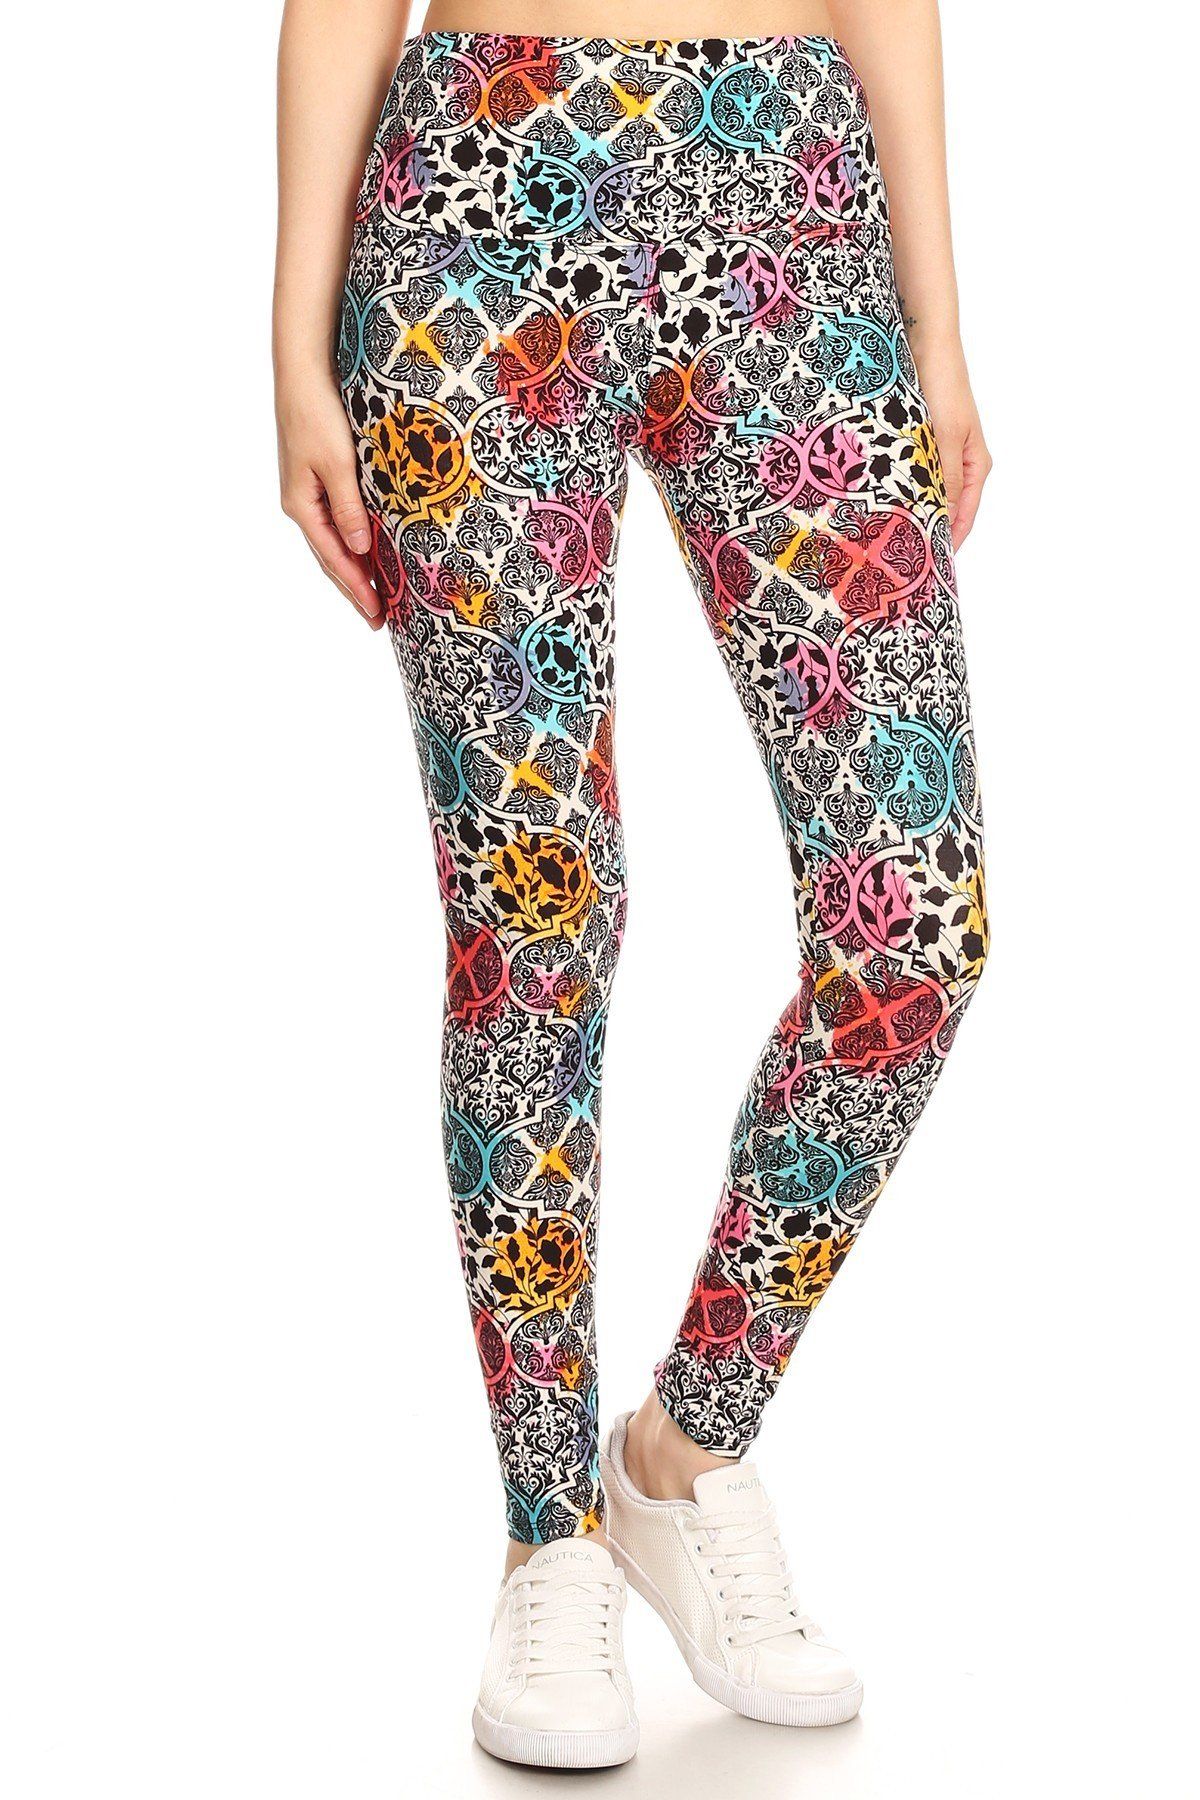 Yoga Style Banded Lined Printed Knit Leggings